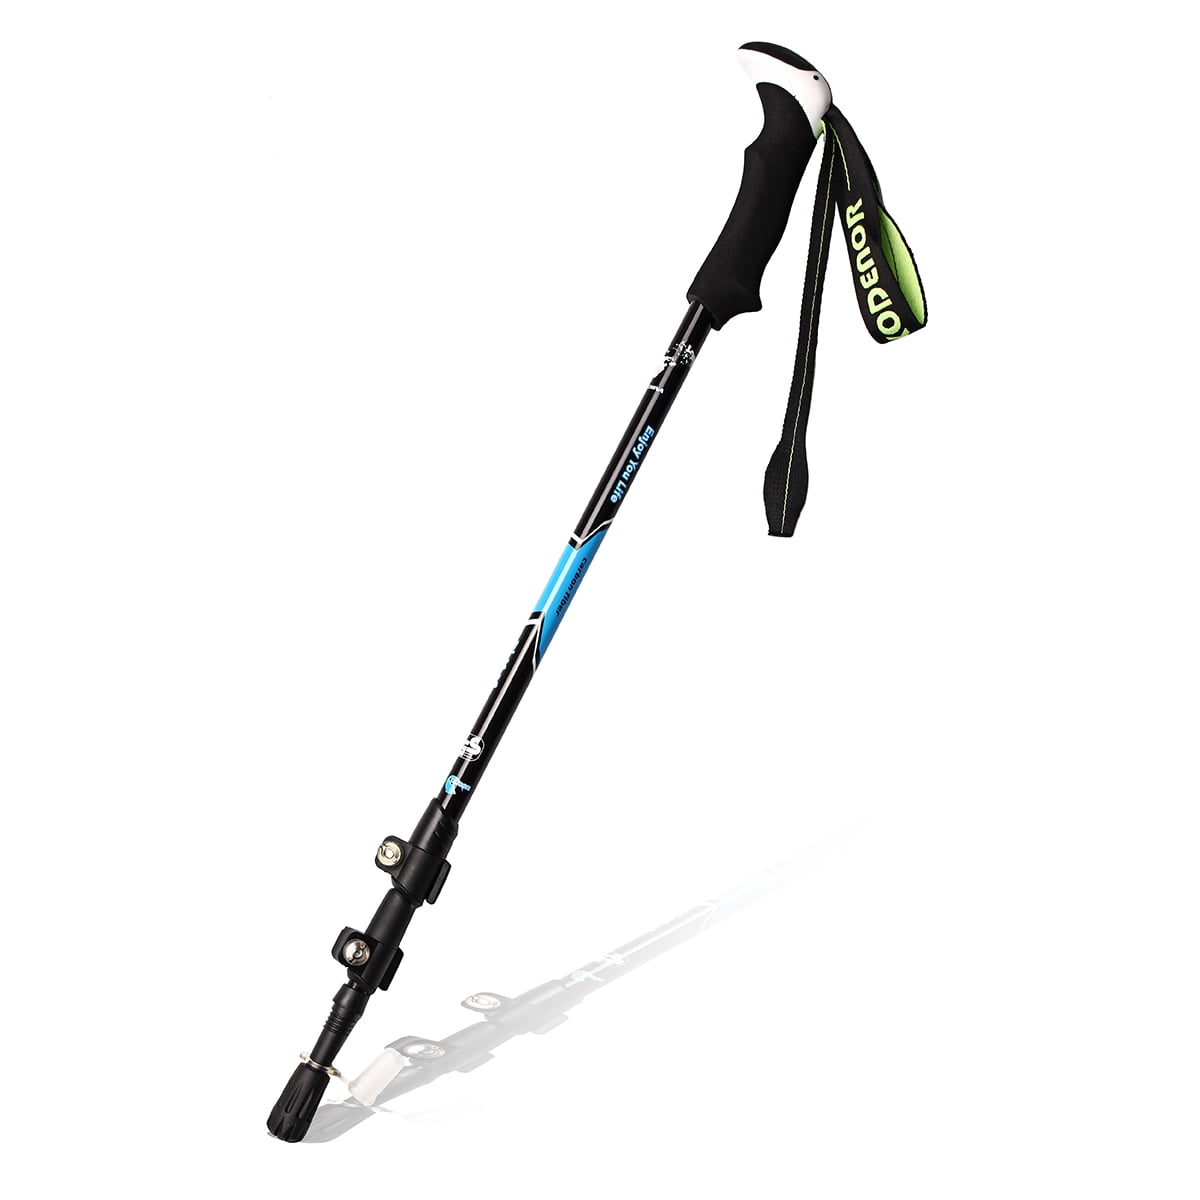 TheFitLife Nordic Walking Trekking Poles - 2 Packs with Antishock and Quick  Lock System, Telescopic, Collapsible, Ultralight for Hiking, Camping,  Mountaining, Backpacking, Walking, Trekking (Black), Trekking Poles -   Canada